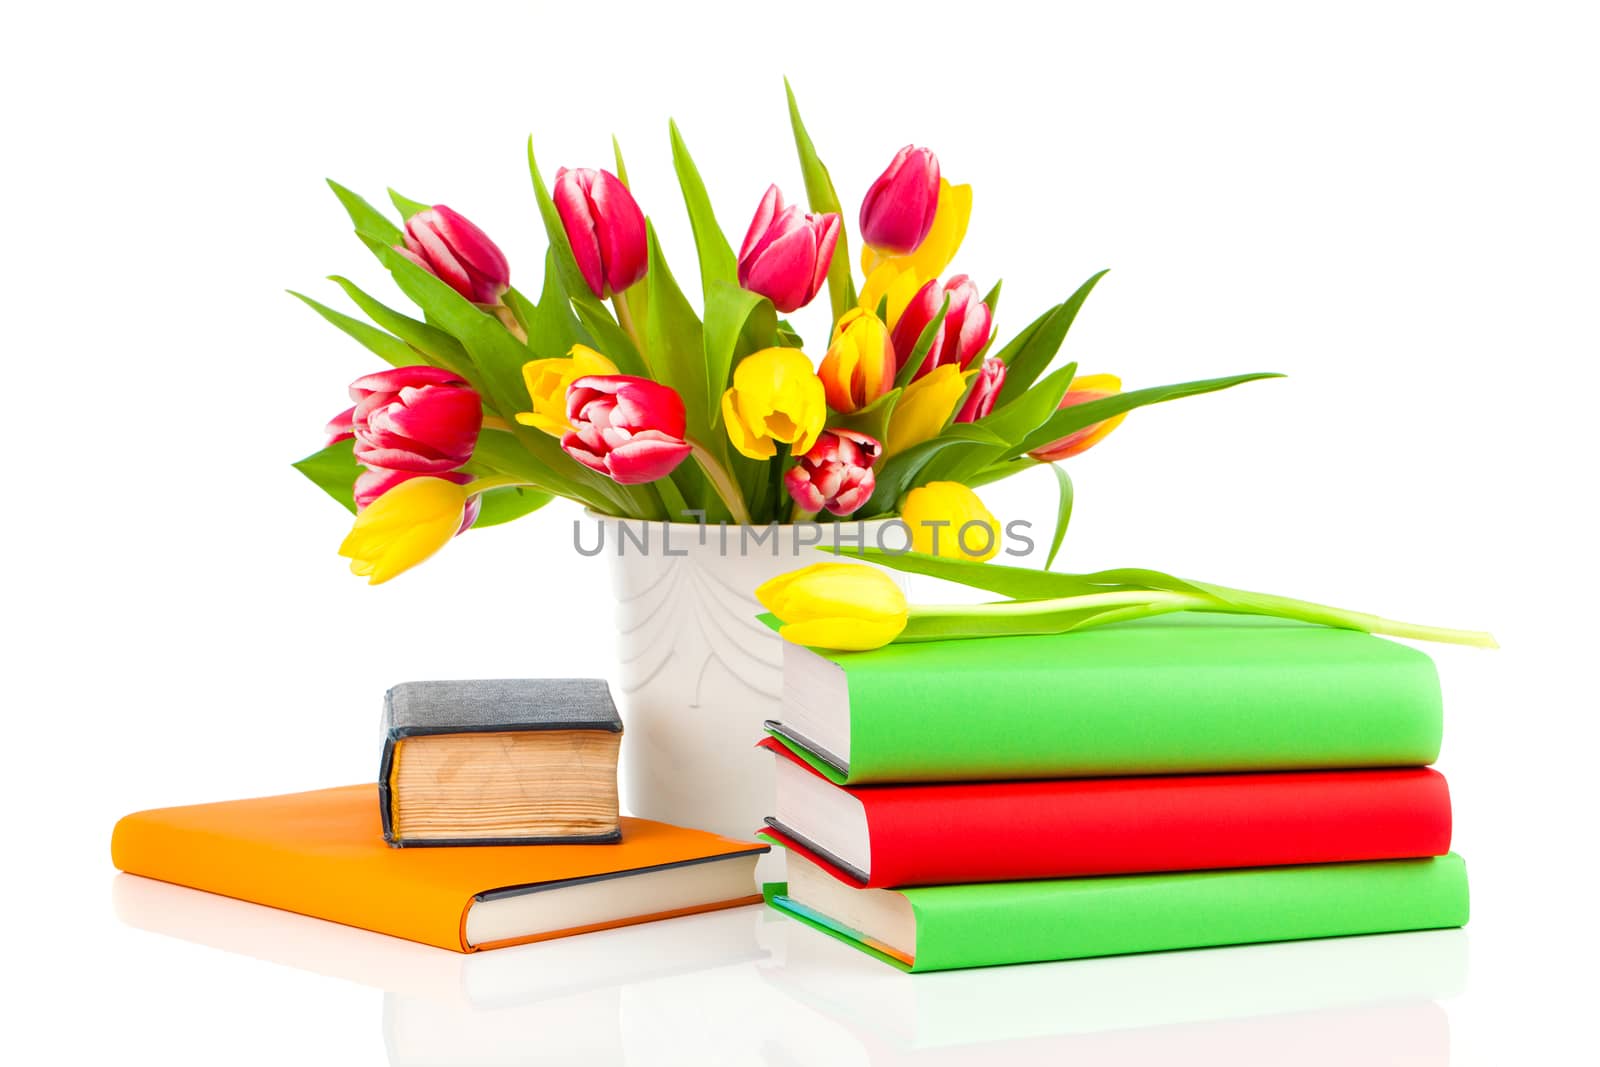 bunch of spring tulips and books, isolated on white background by motorolka